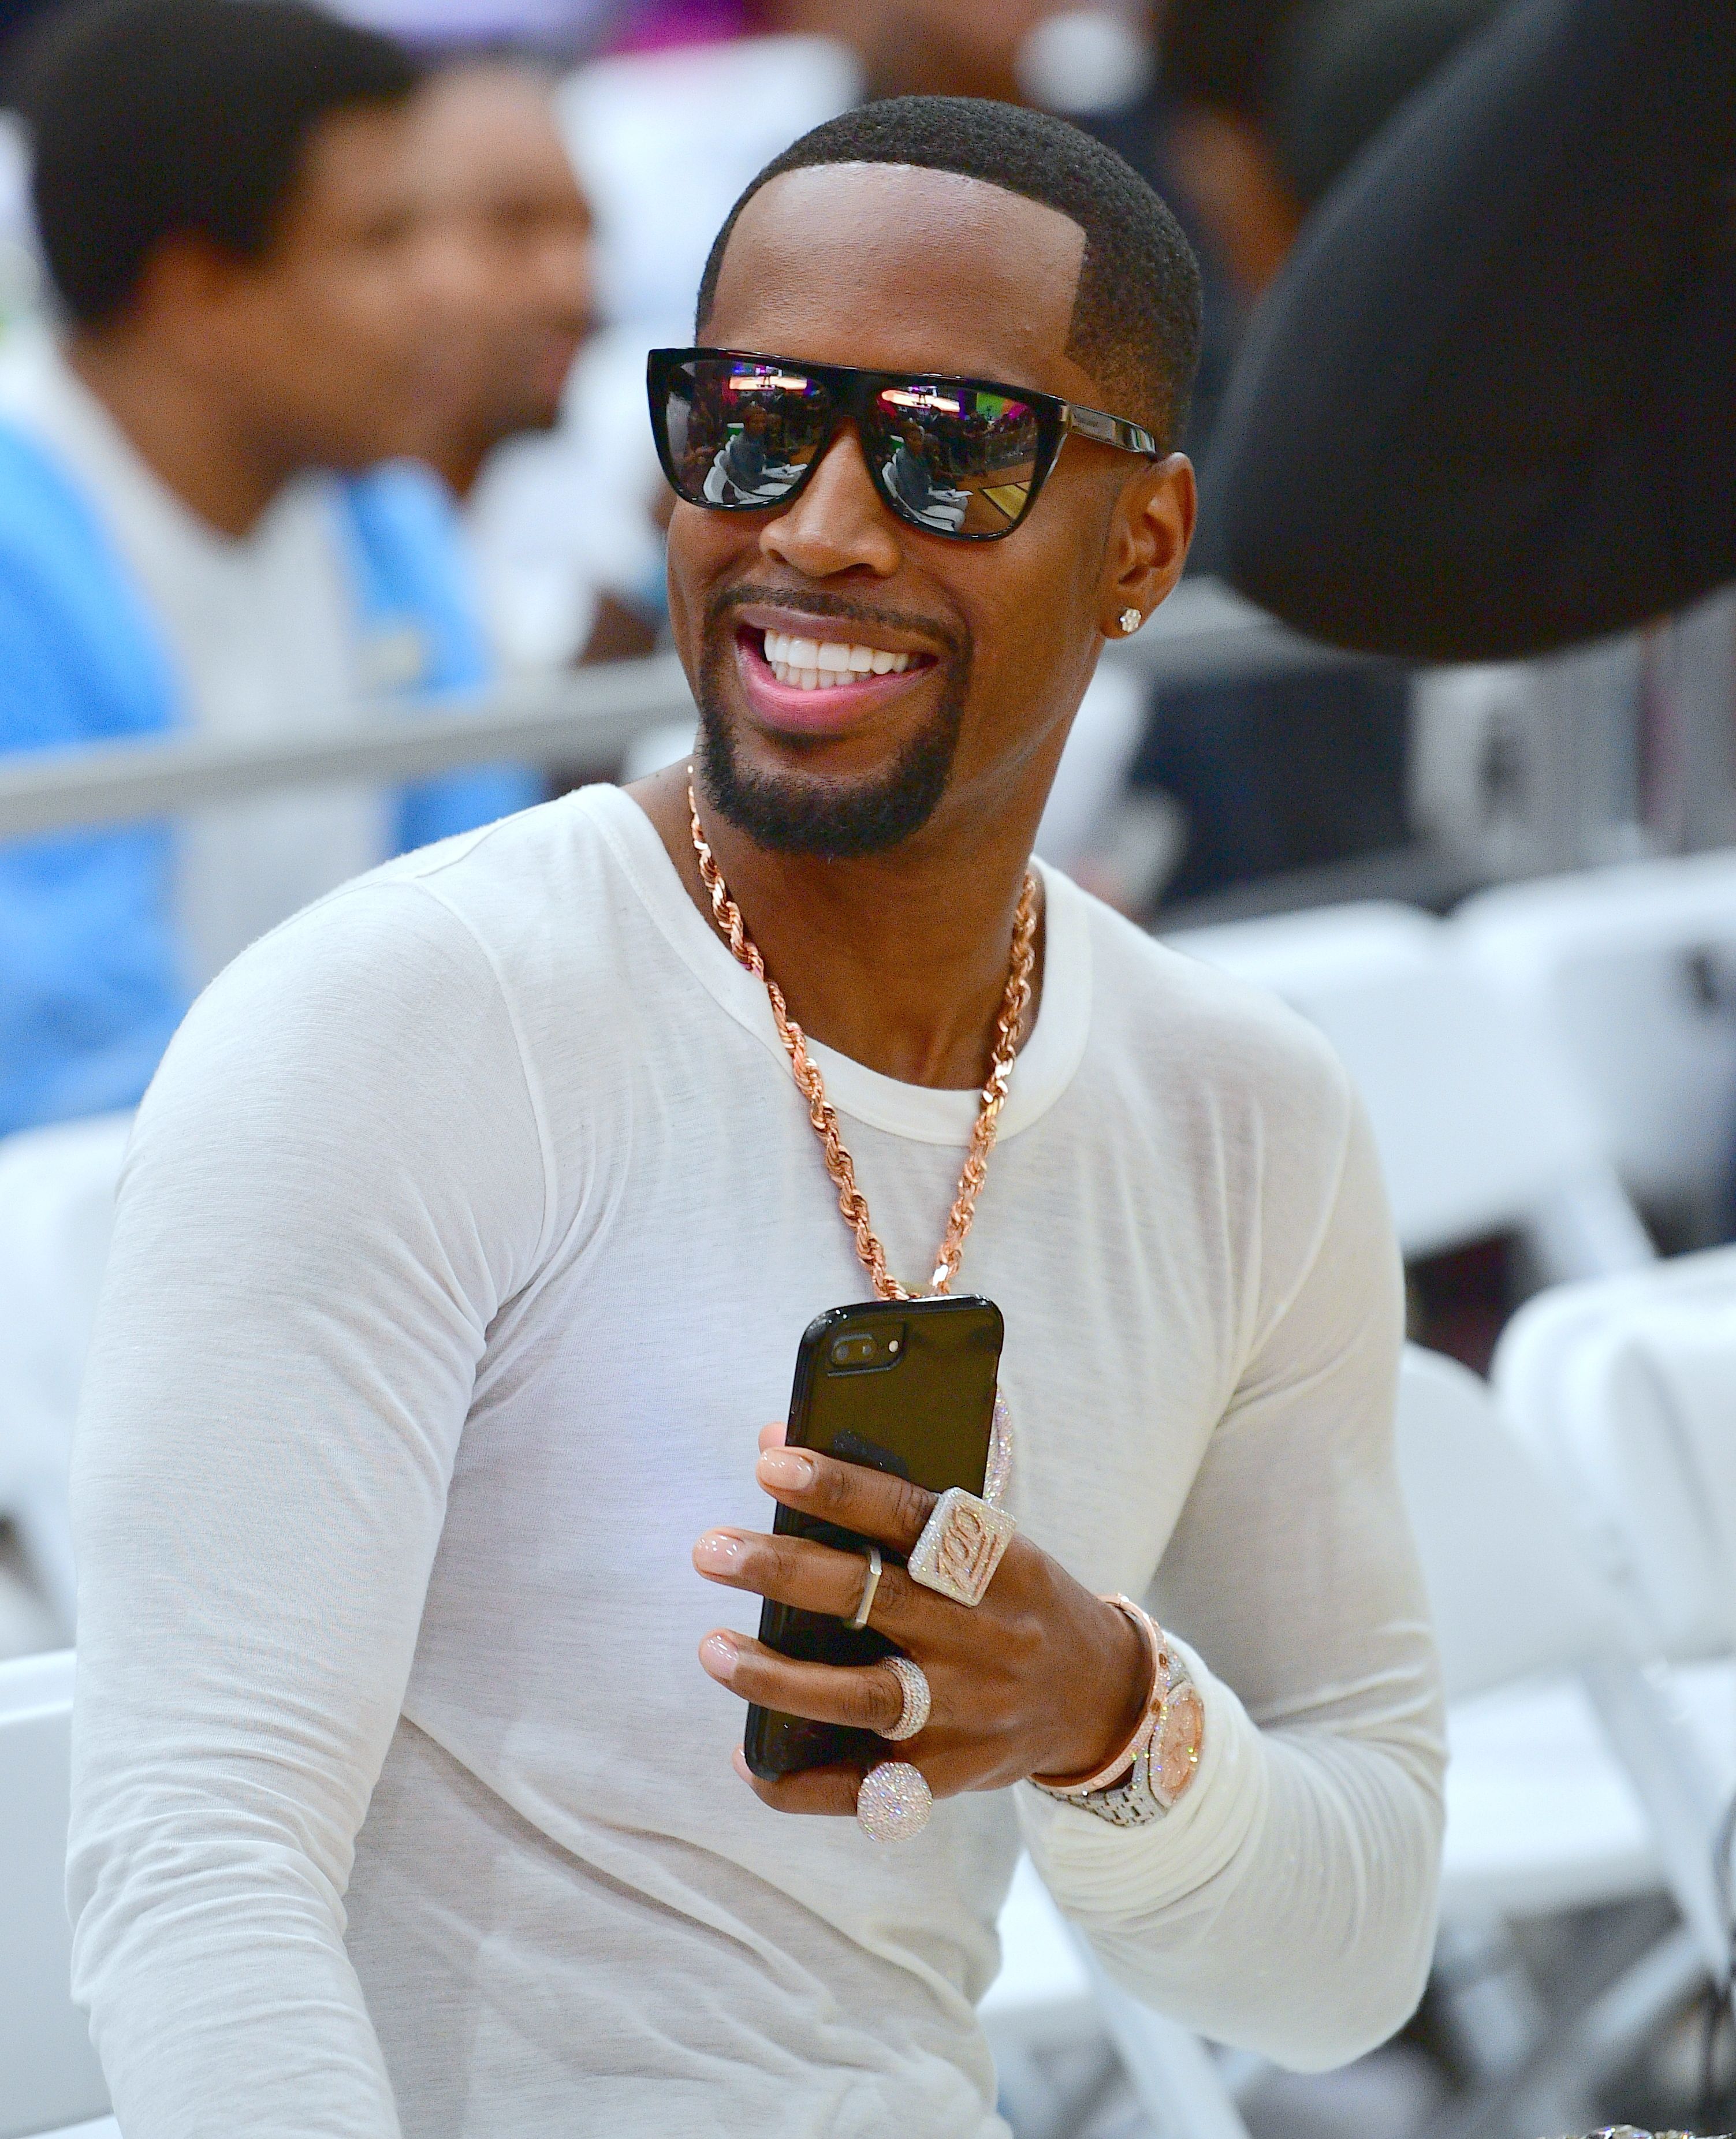 Safaree Samuels at the celebrity basketball game during the 2018 BET Experience at the Los Angeles Convention Center on June 23, 2018 | Photo: Getty Images